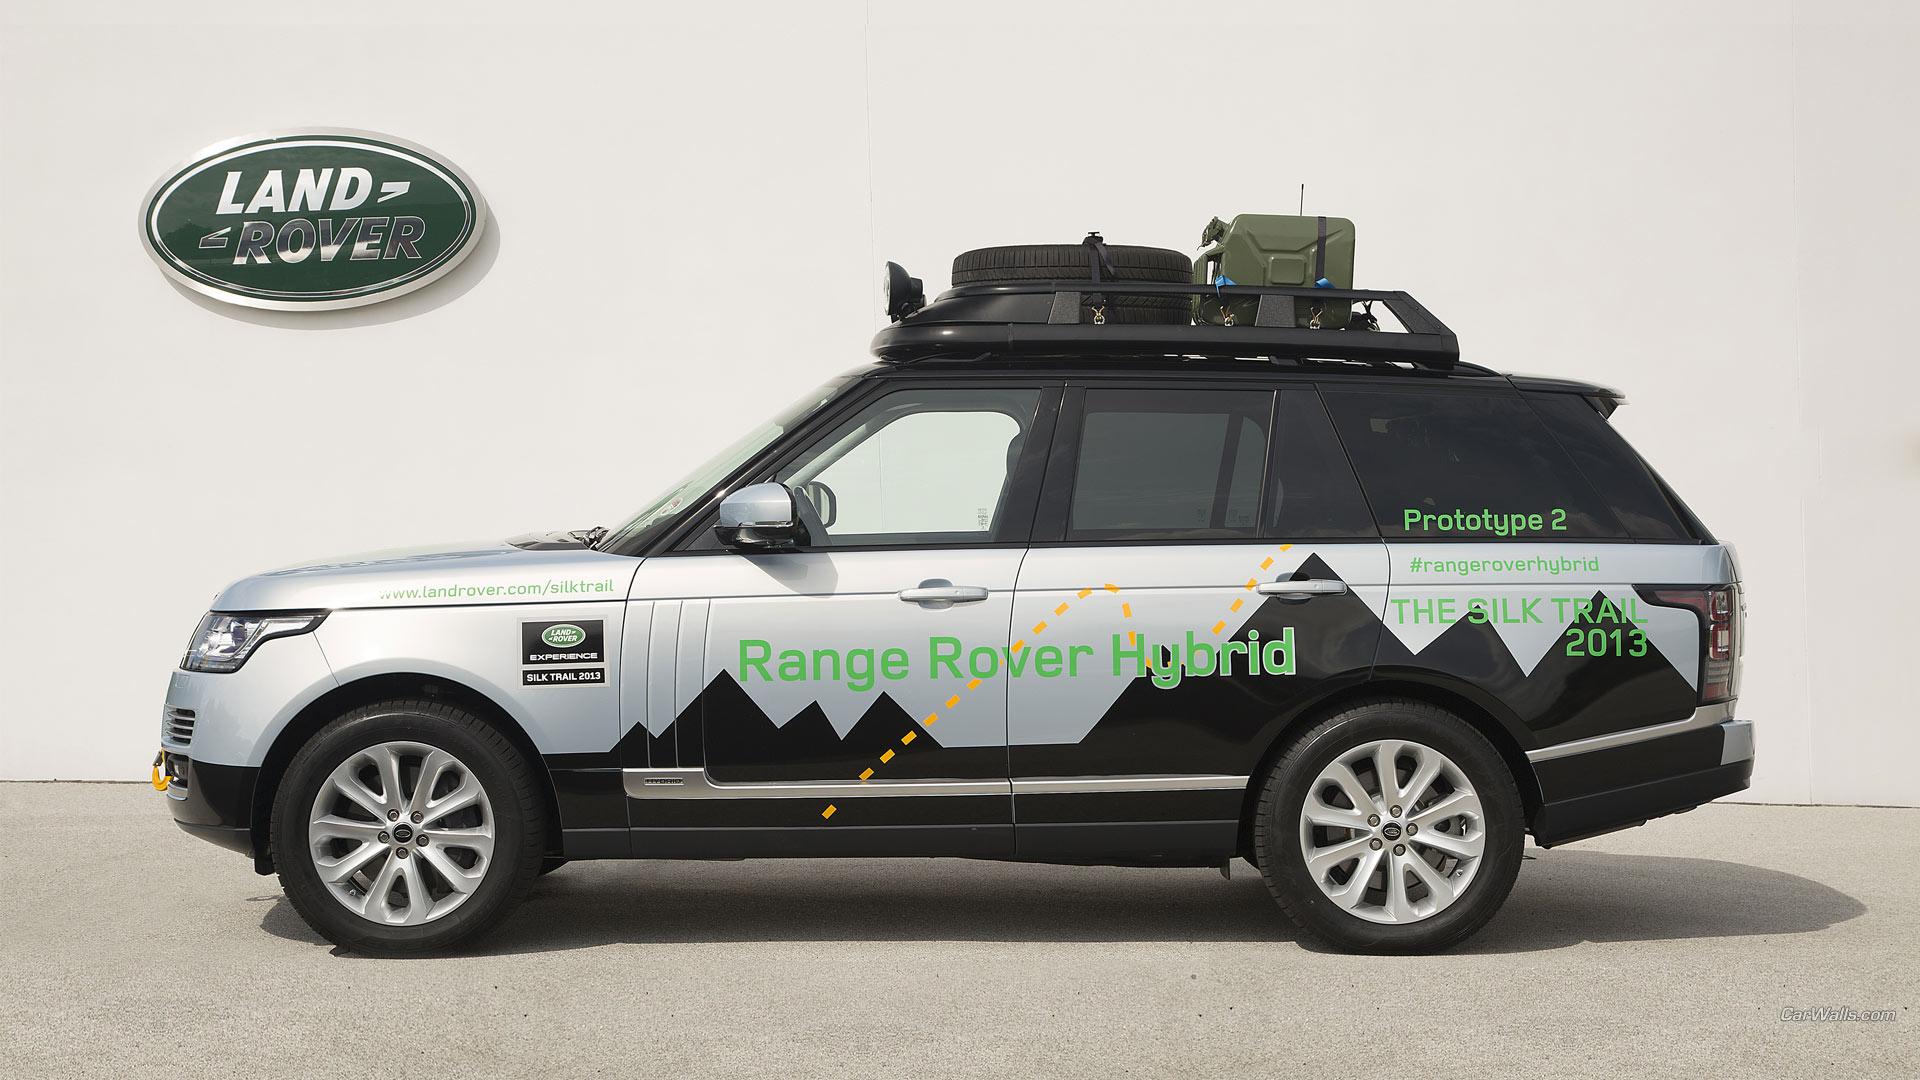 Land Rover Logo Wallpaper, image collections of wallpaper